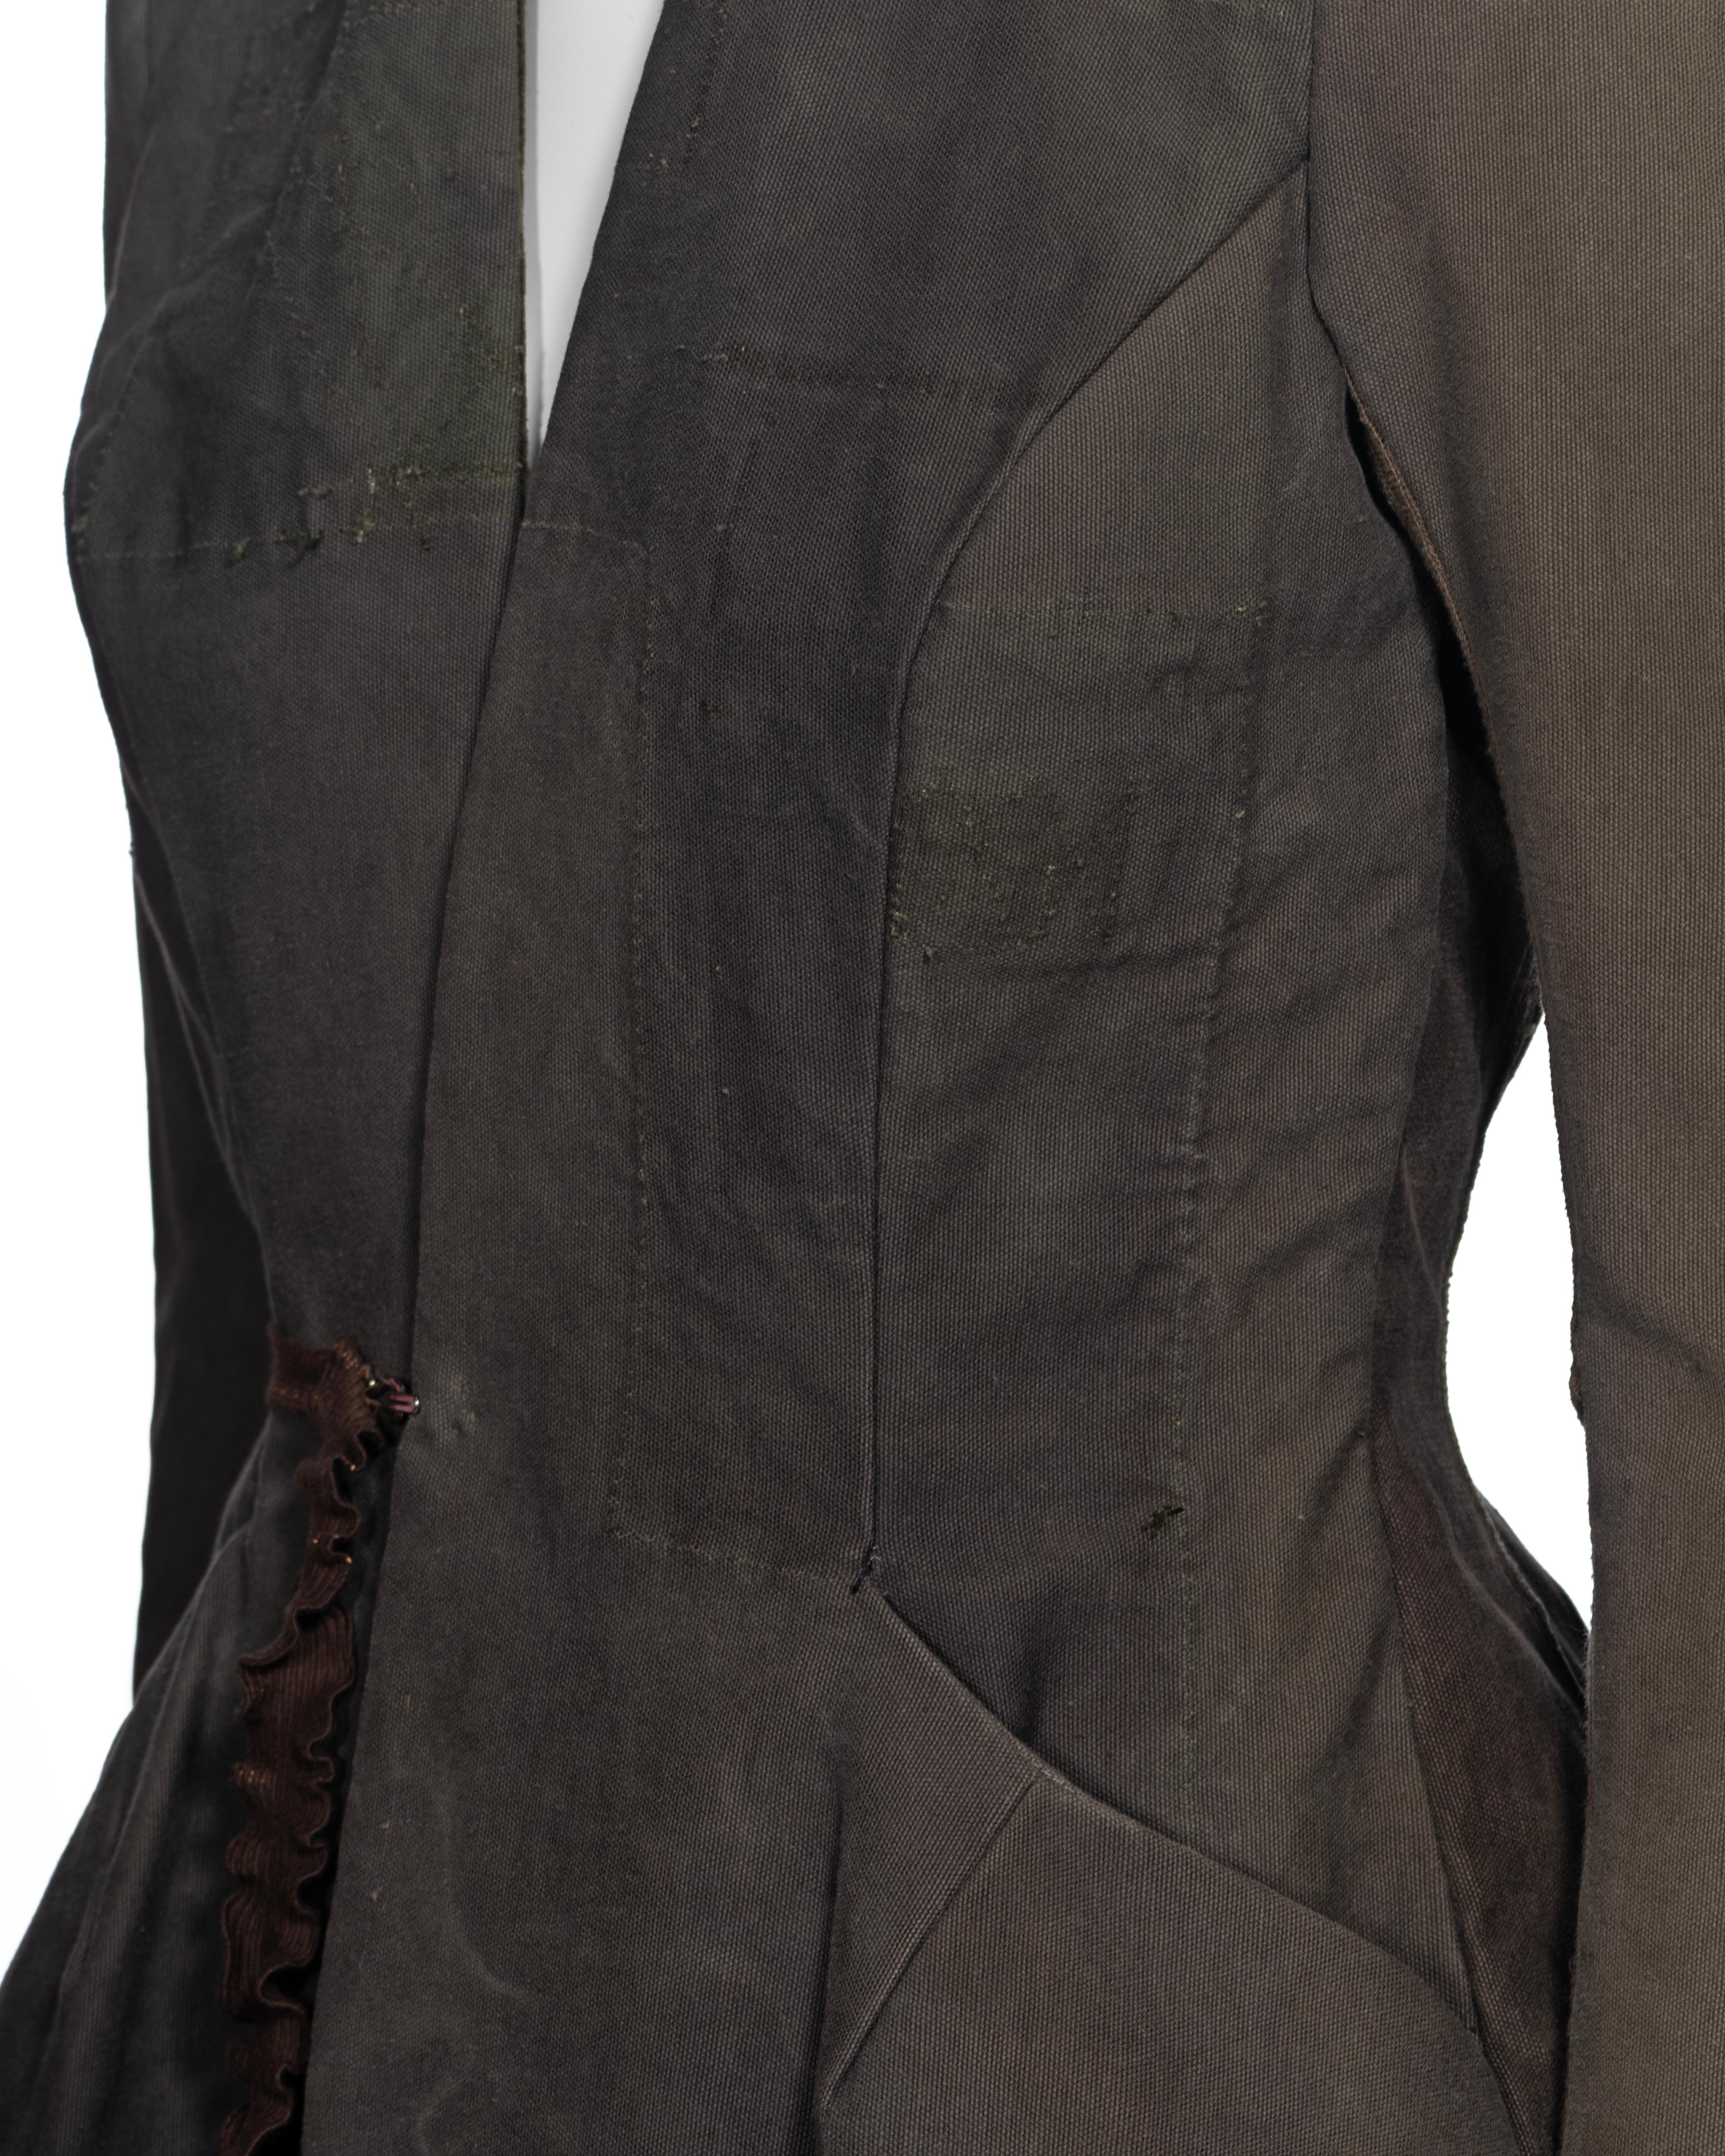 Rick Owens Jacket Made From Deconstructed Military Surplus Bags, c. 1998 13